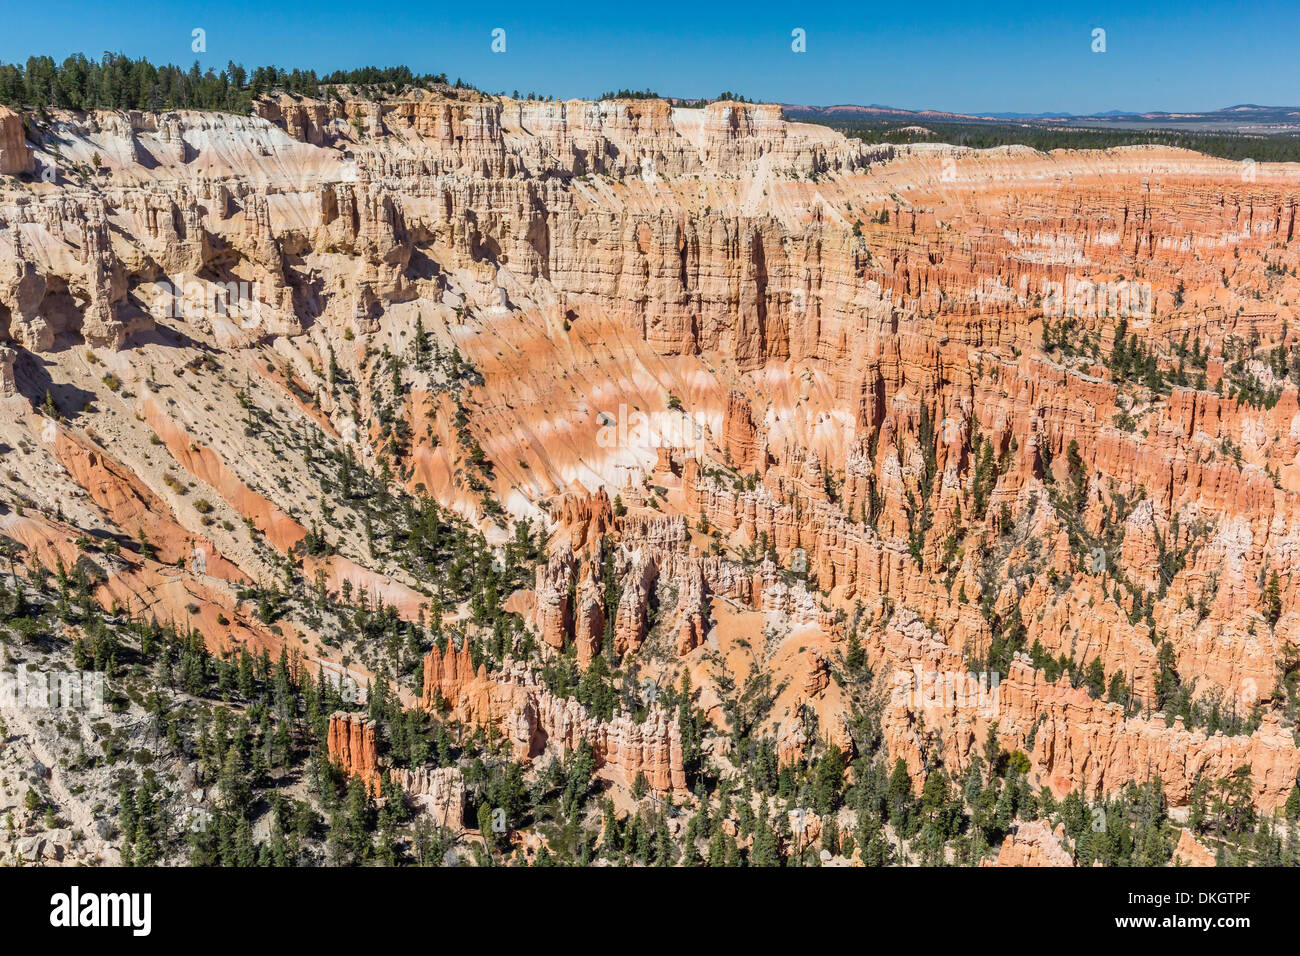 Bryce Canyon Amphitheater from Bryce Point, Bryce Canyon National Park, Utah, United States of America, North America Stock Photo